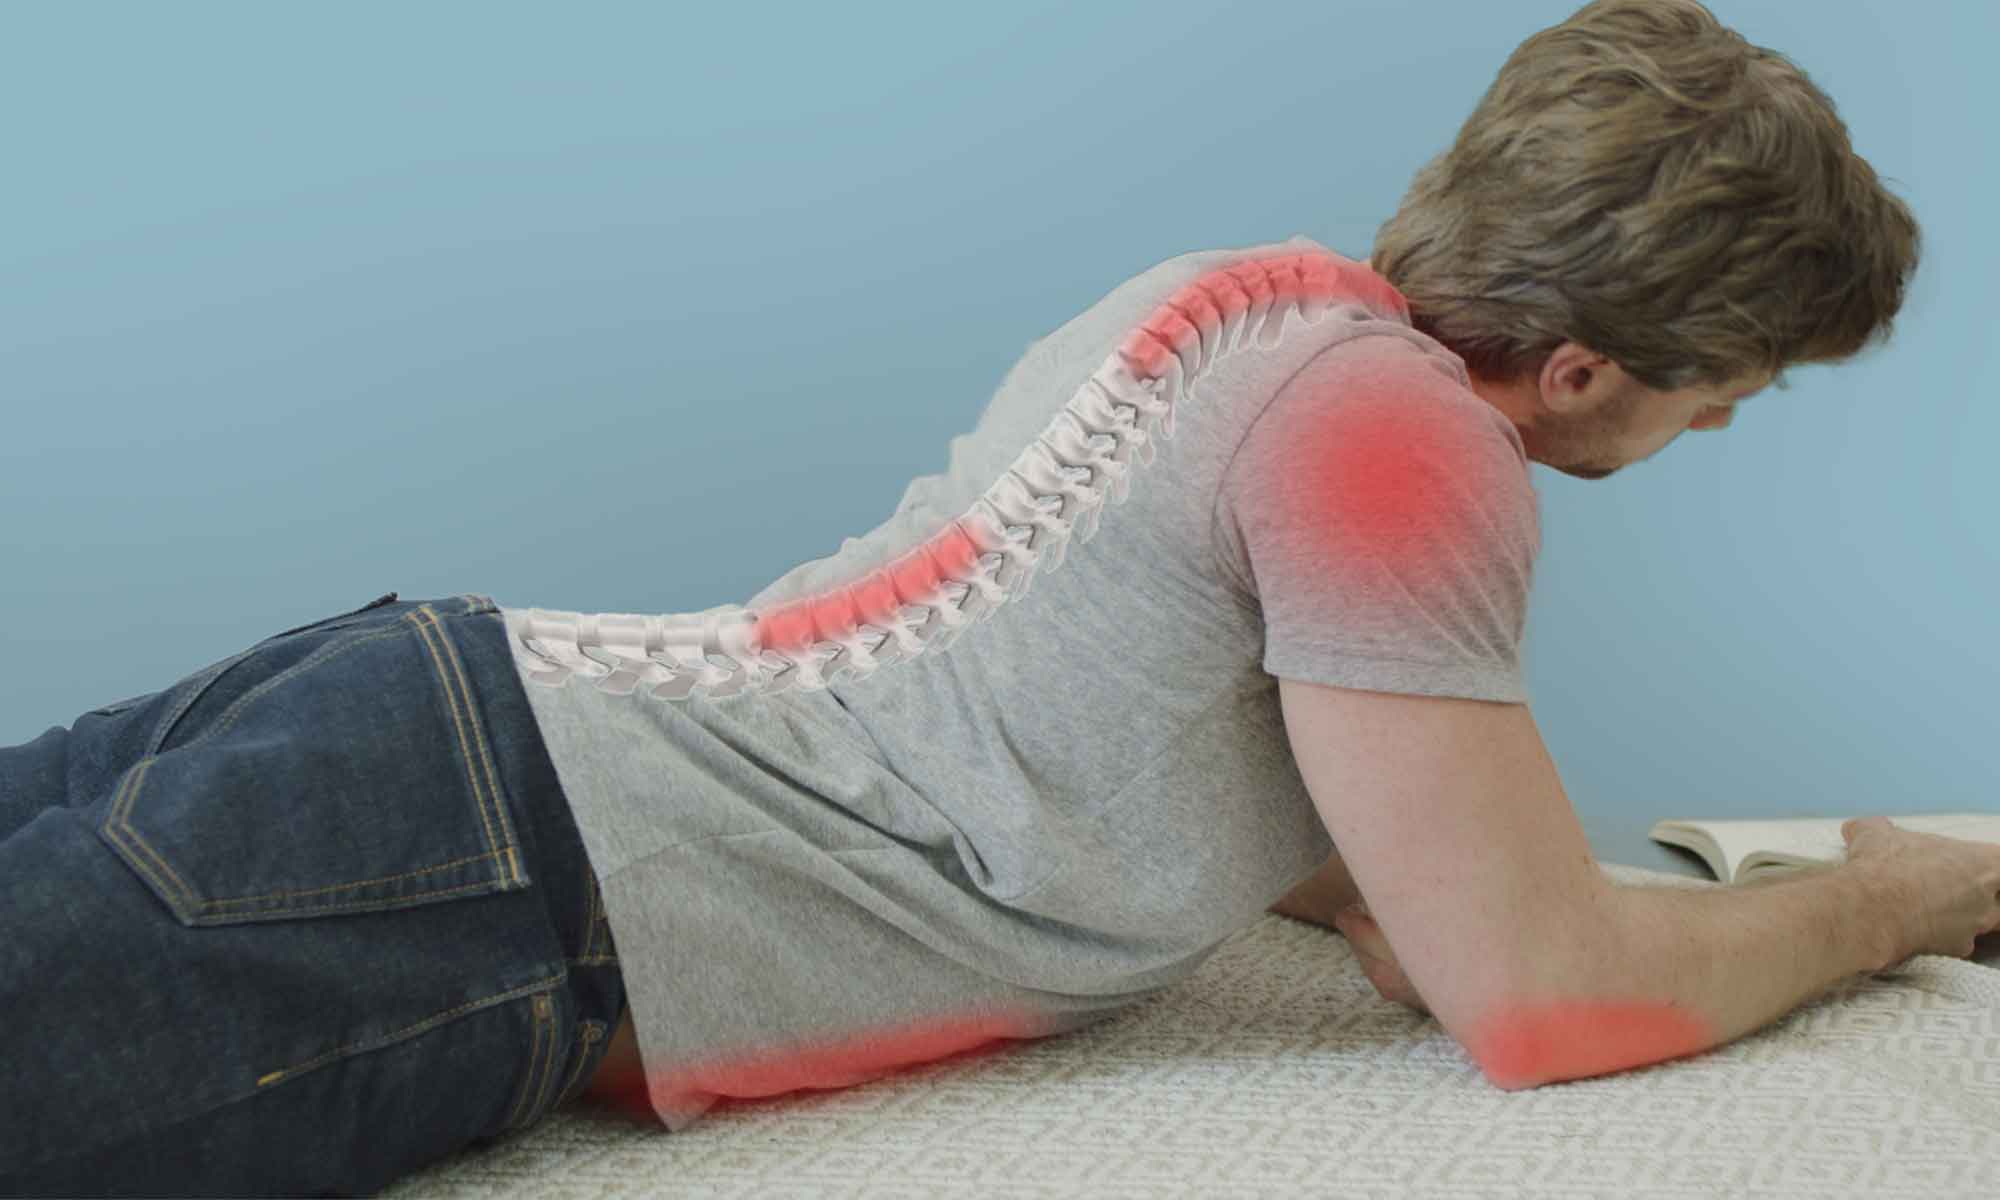 Prone Cushion ergonomic cushion is designed from the ground up for when  you're lying down » Gadget Flow